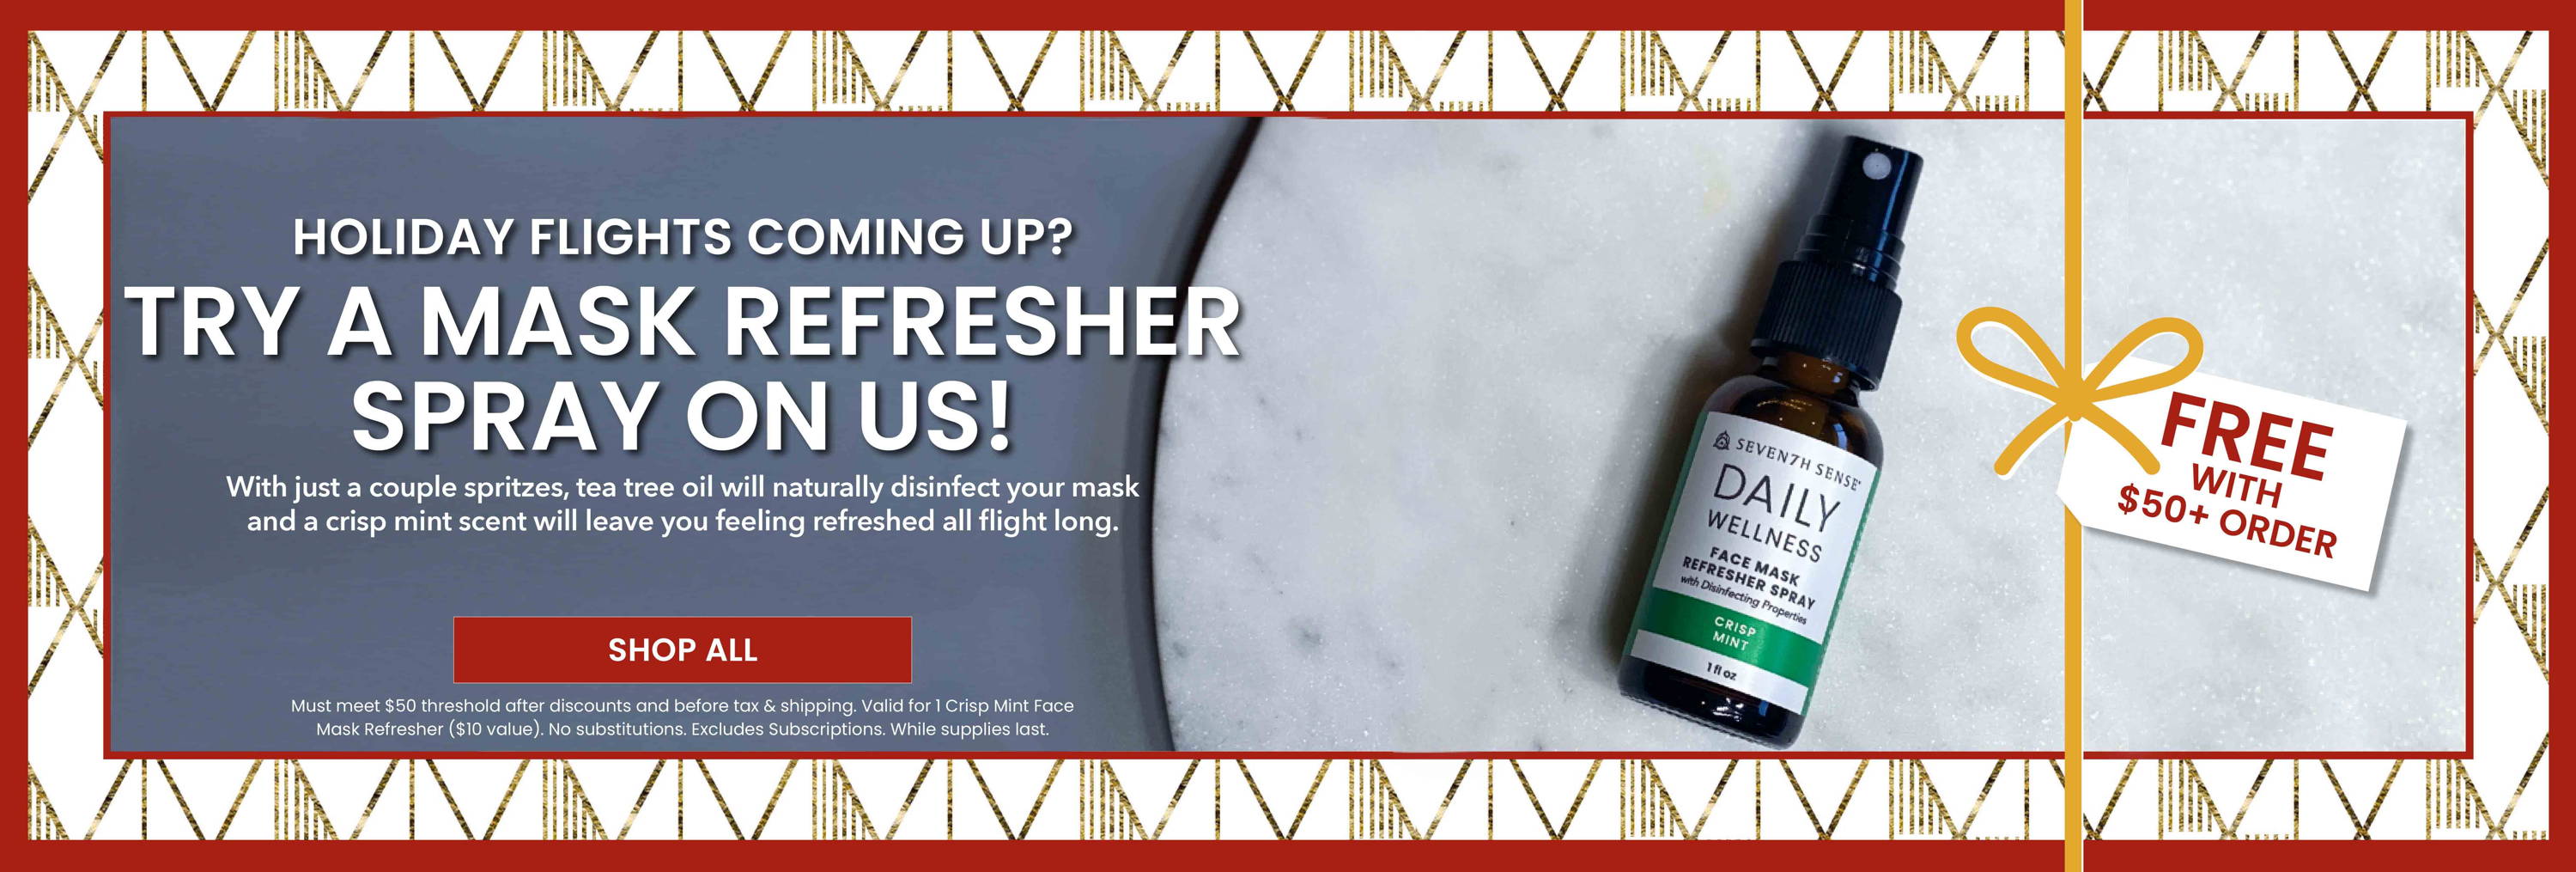 Holiday Flights Coming Up? Try a Mask Refresher Spray on Us!  Free with $50+ Orders.